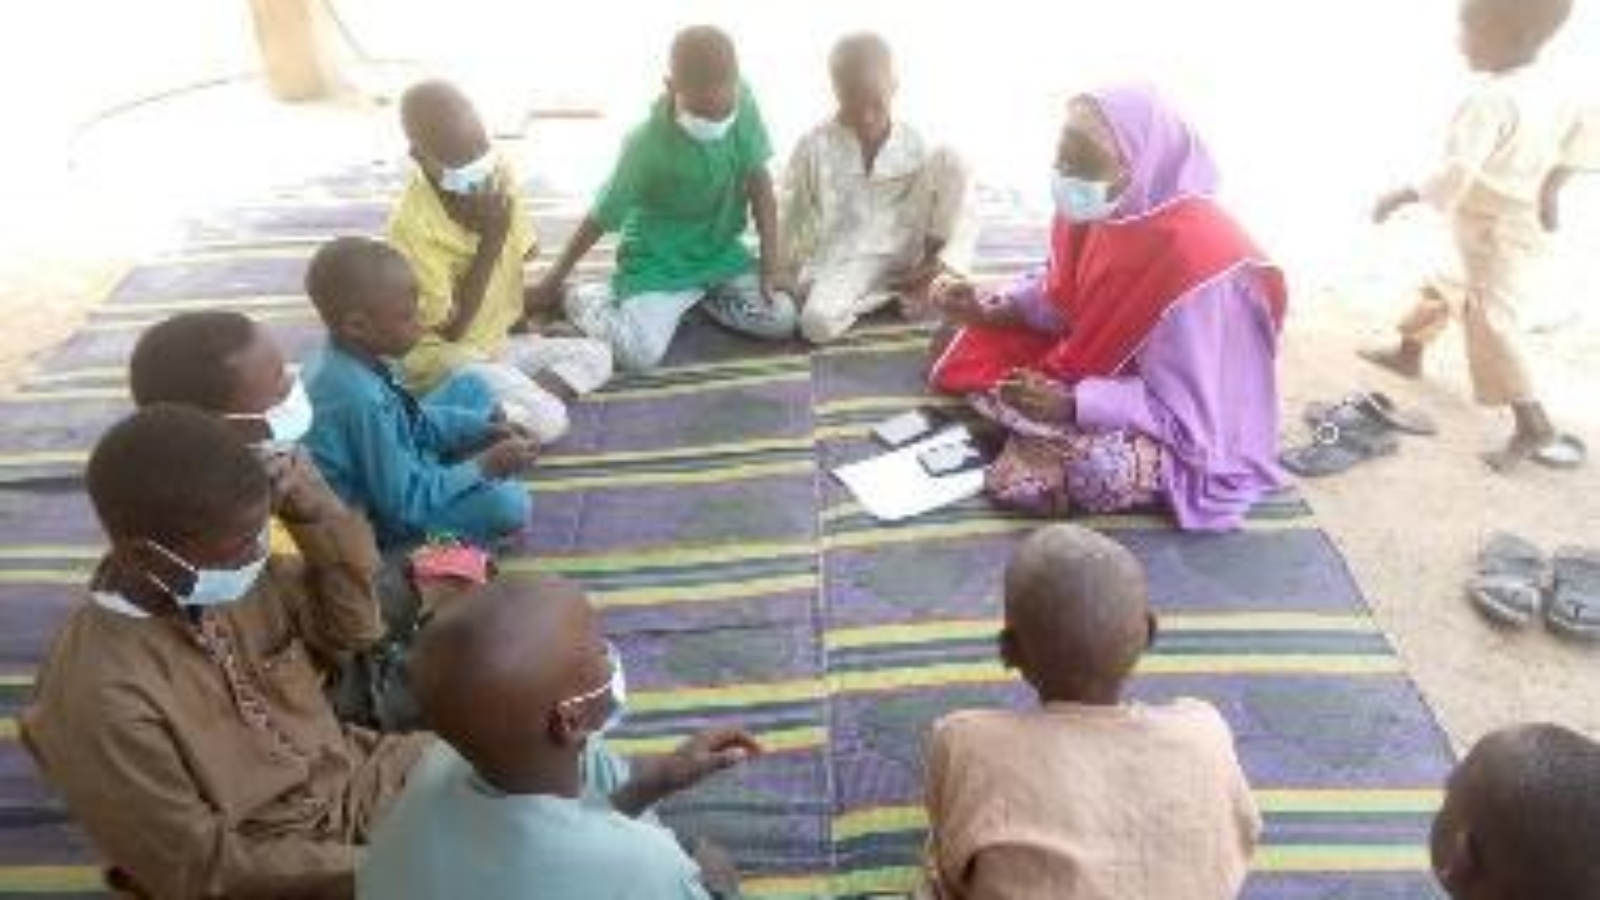 Addressing Vulnerabilities Of Conflict-Affected Girls And Boys